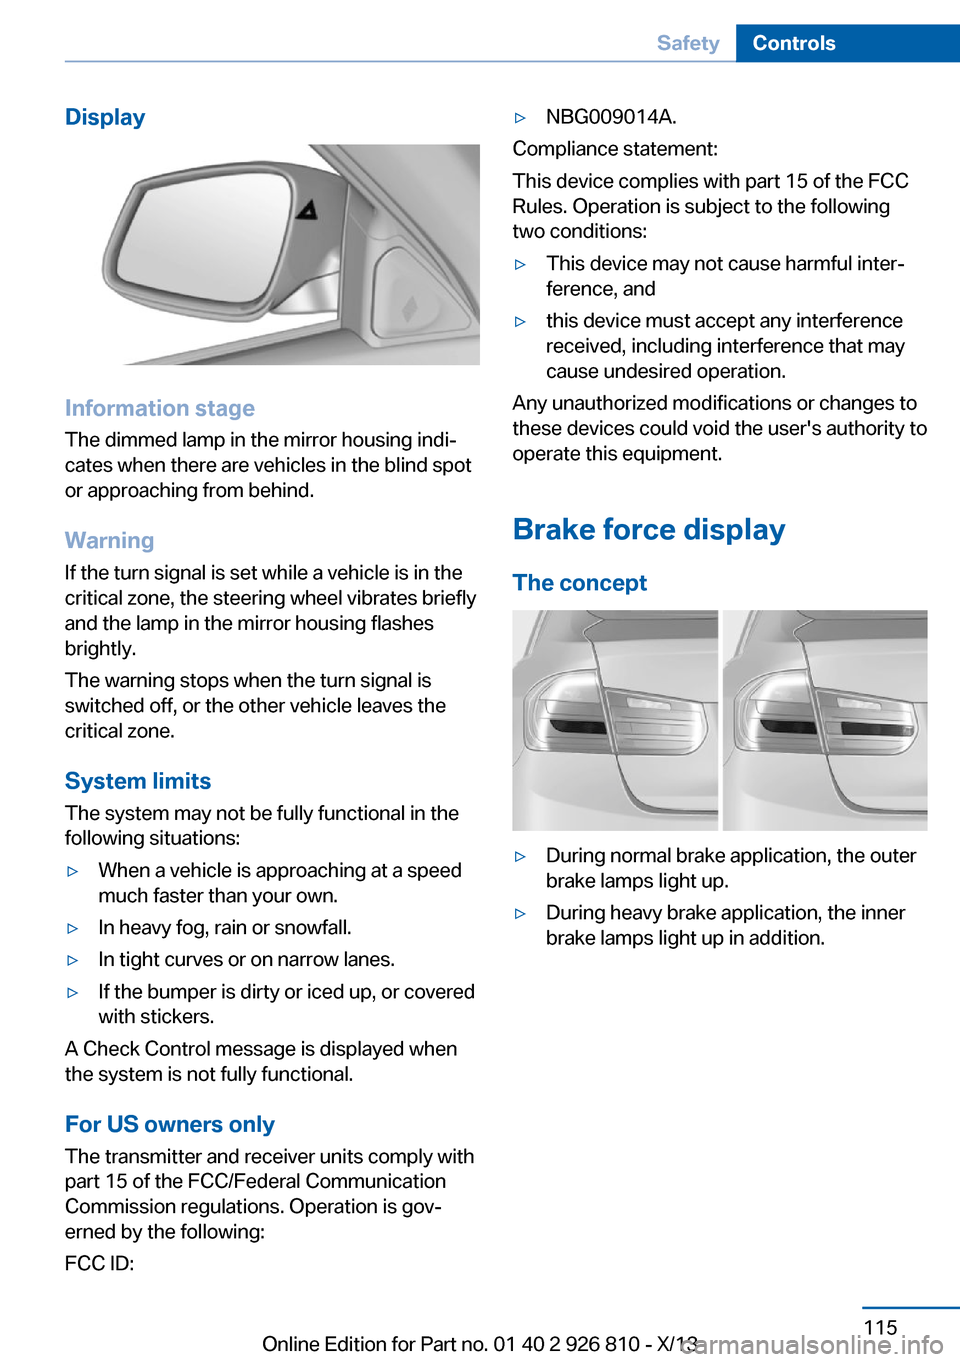 BMW 3 SERIES SEDAN 2013 F30 Owners Guide Display
Information stage
The dimmed lamp in the mirror housing indi‐
cates when there are vehicles in the blind spot
or approaching from behind.
Warning
If the turn signal is set while a vehicle is